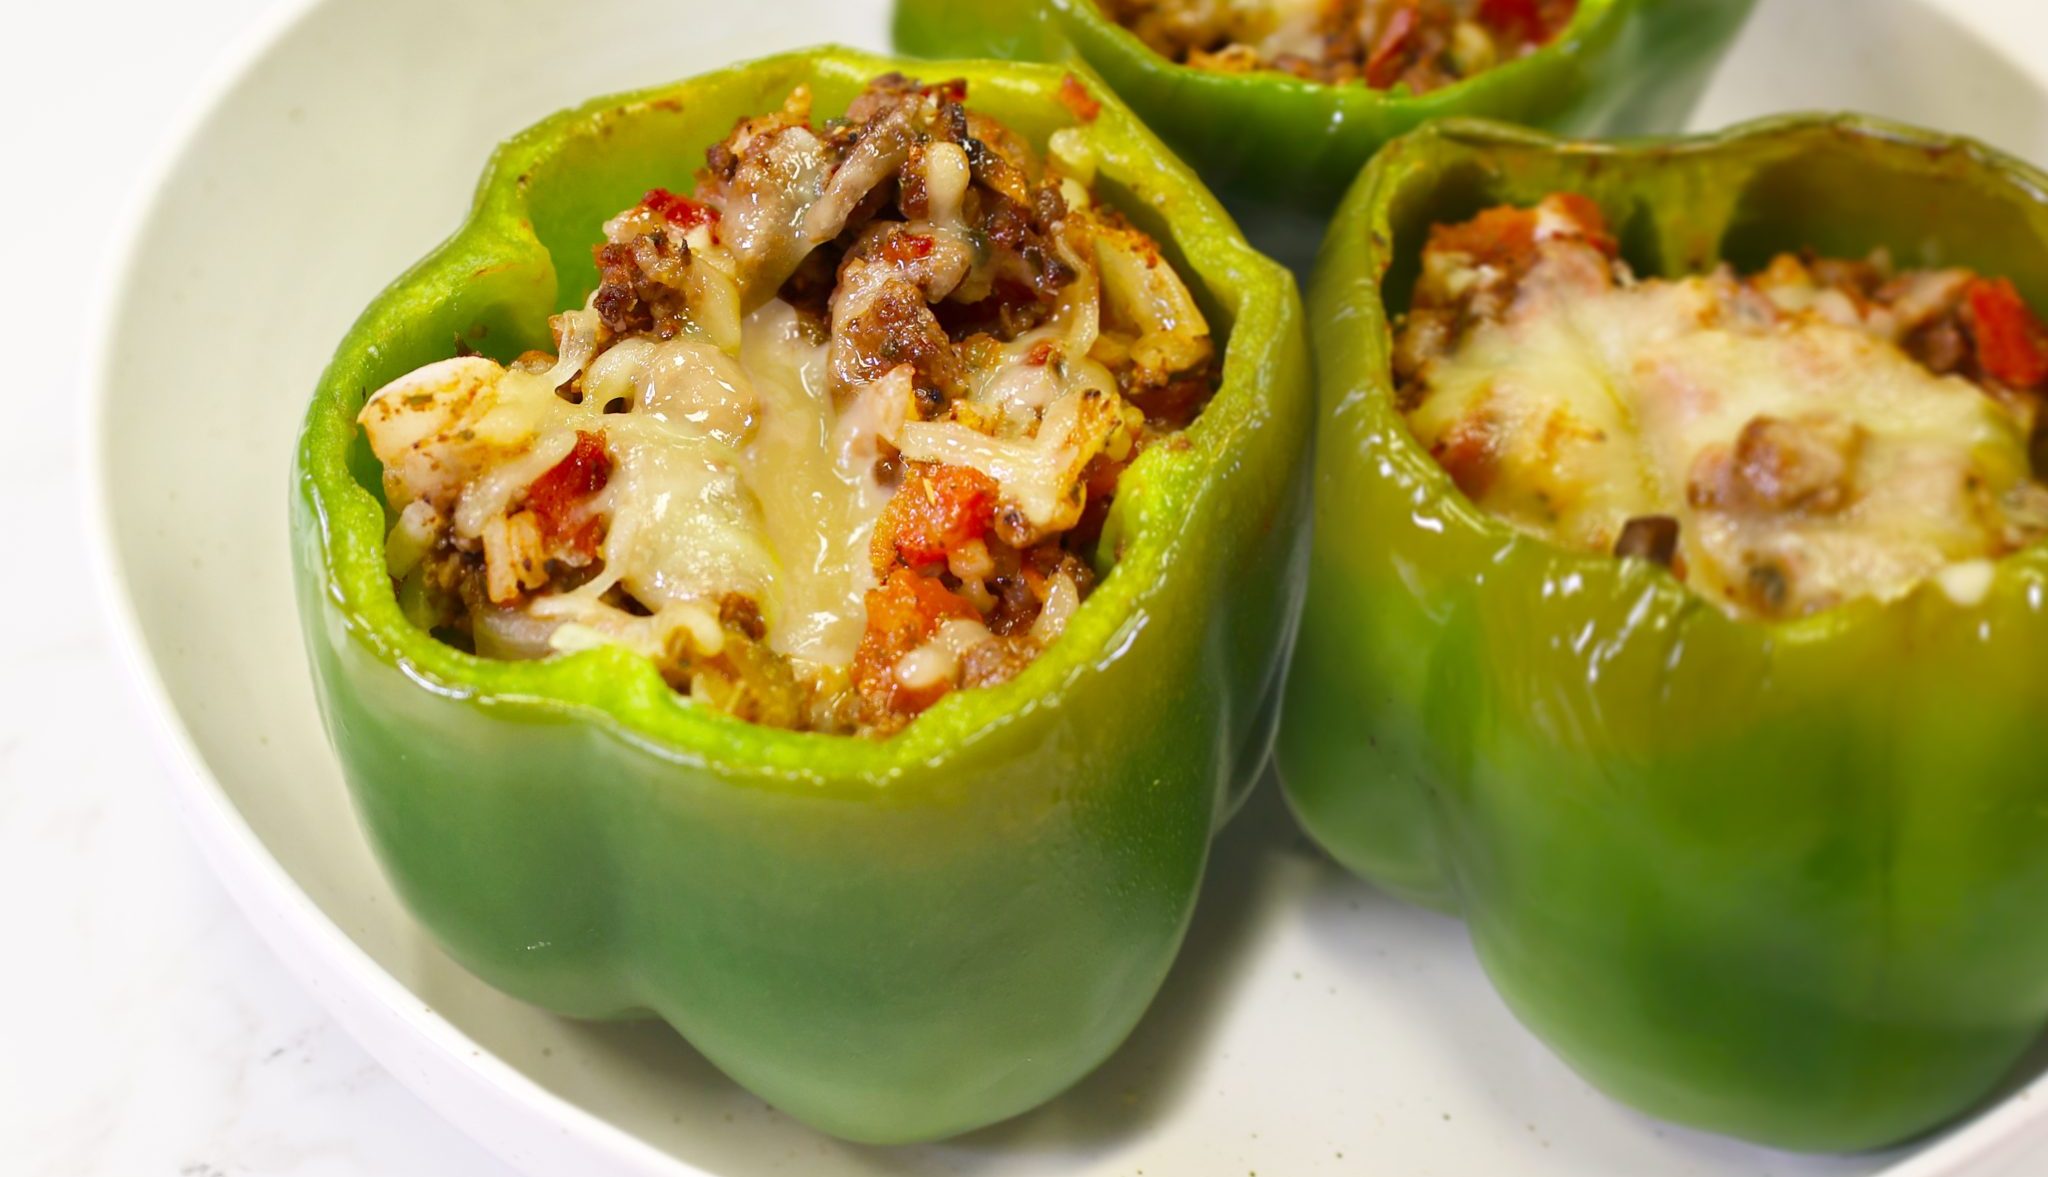 Stuffed Bell Peppers with Ground Venison, venison and cheese in green bell pepper